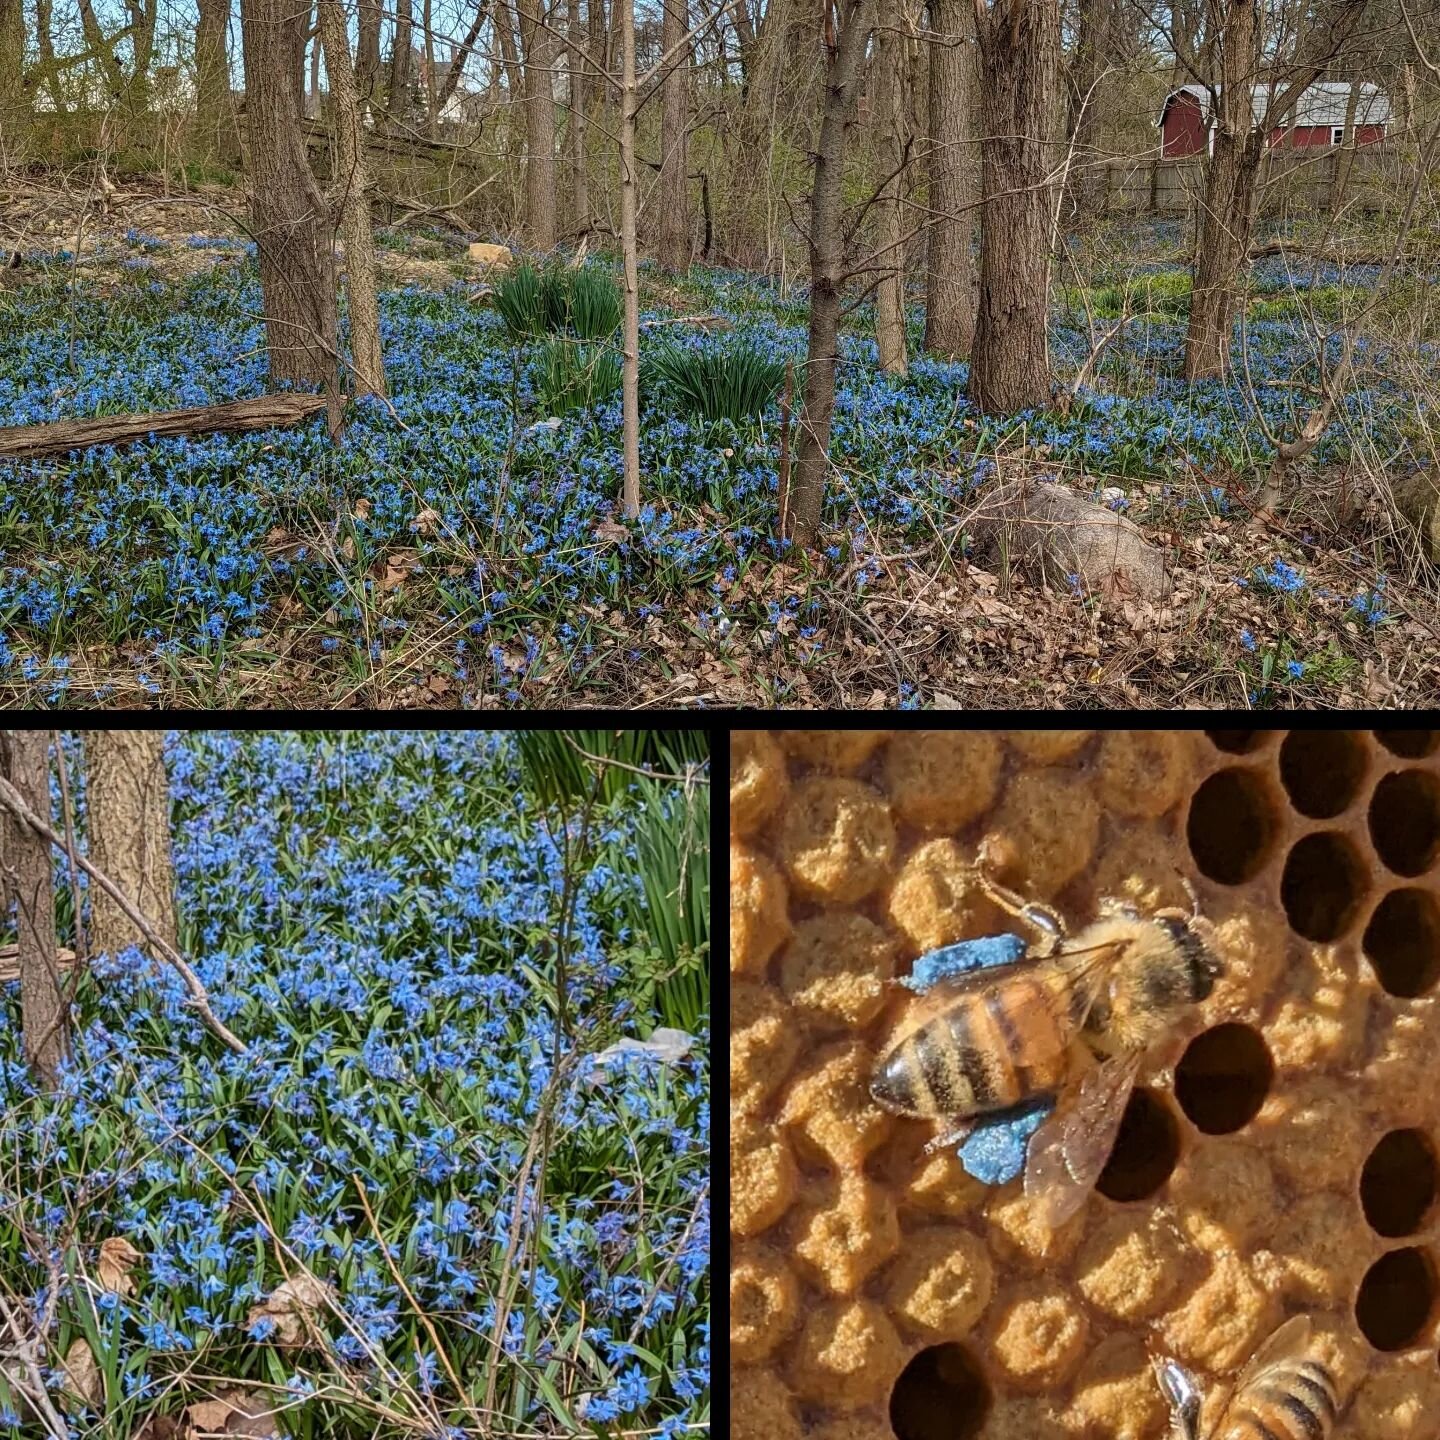 @thistleandtwill the Siberian Squill patch is in town 0.8 miles from the bee hives. Every year they find it and bring the blue pollen back. We drove by this afternoon to see the blooms. It's absolutely beautiful!